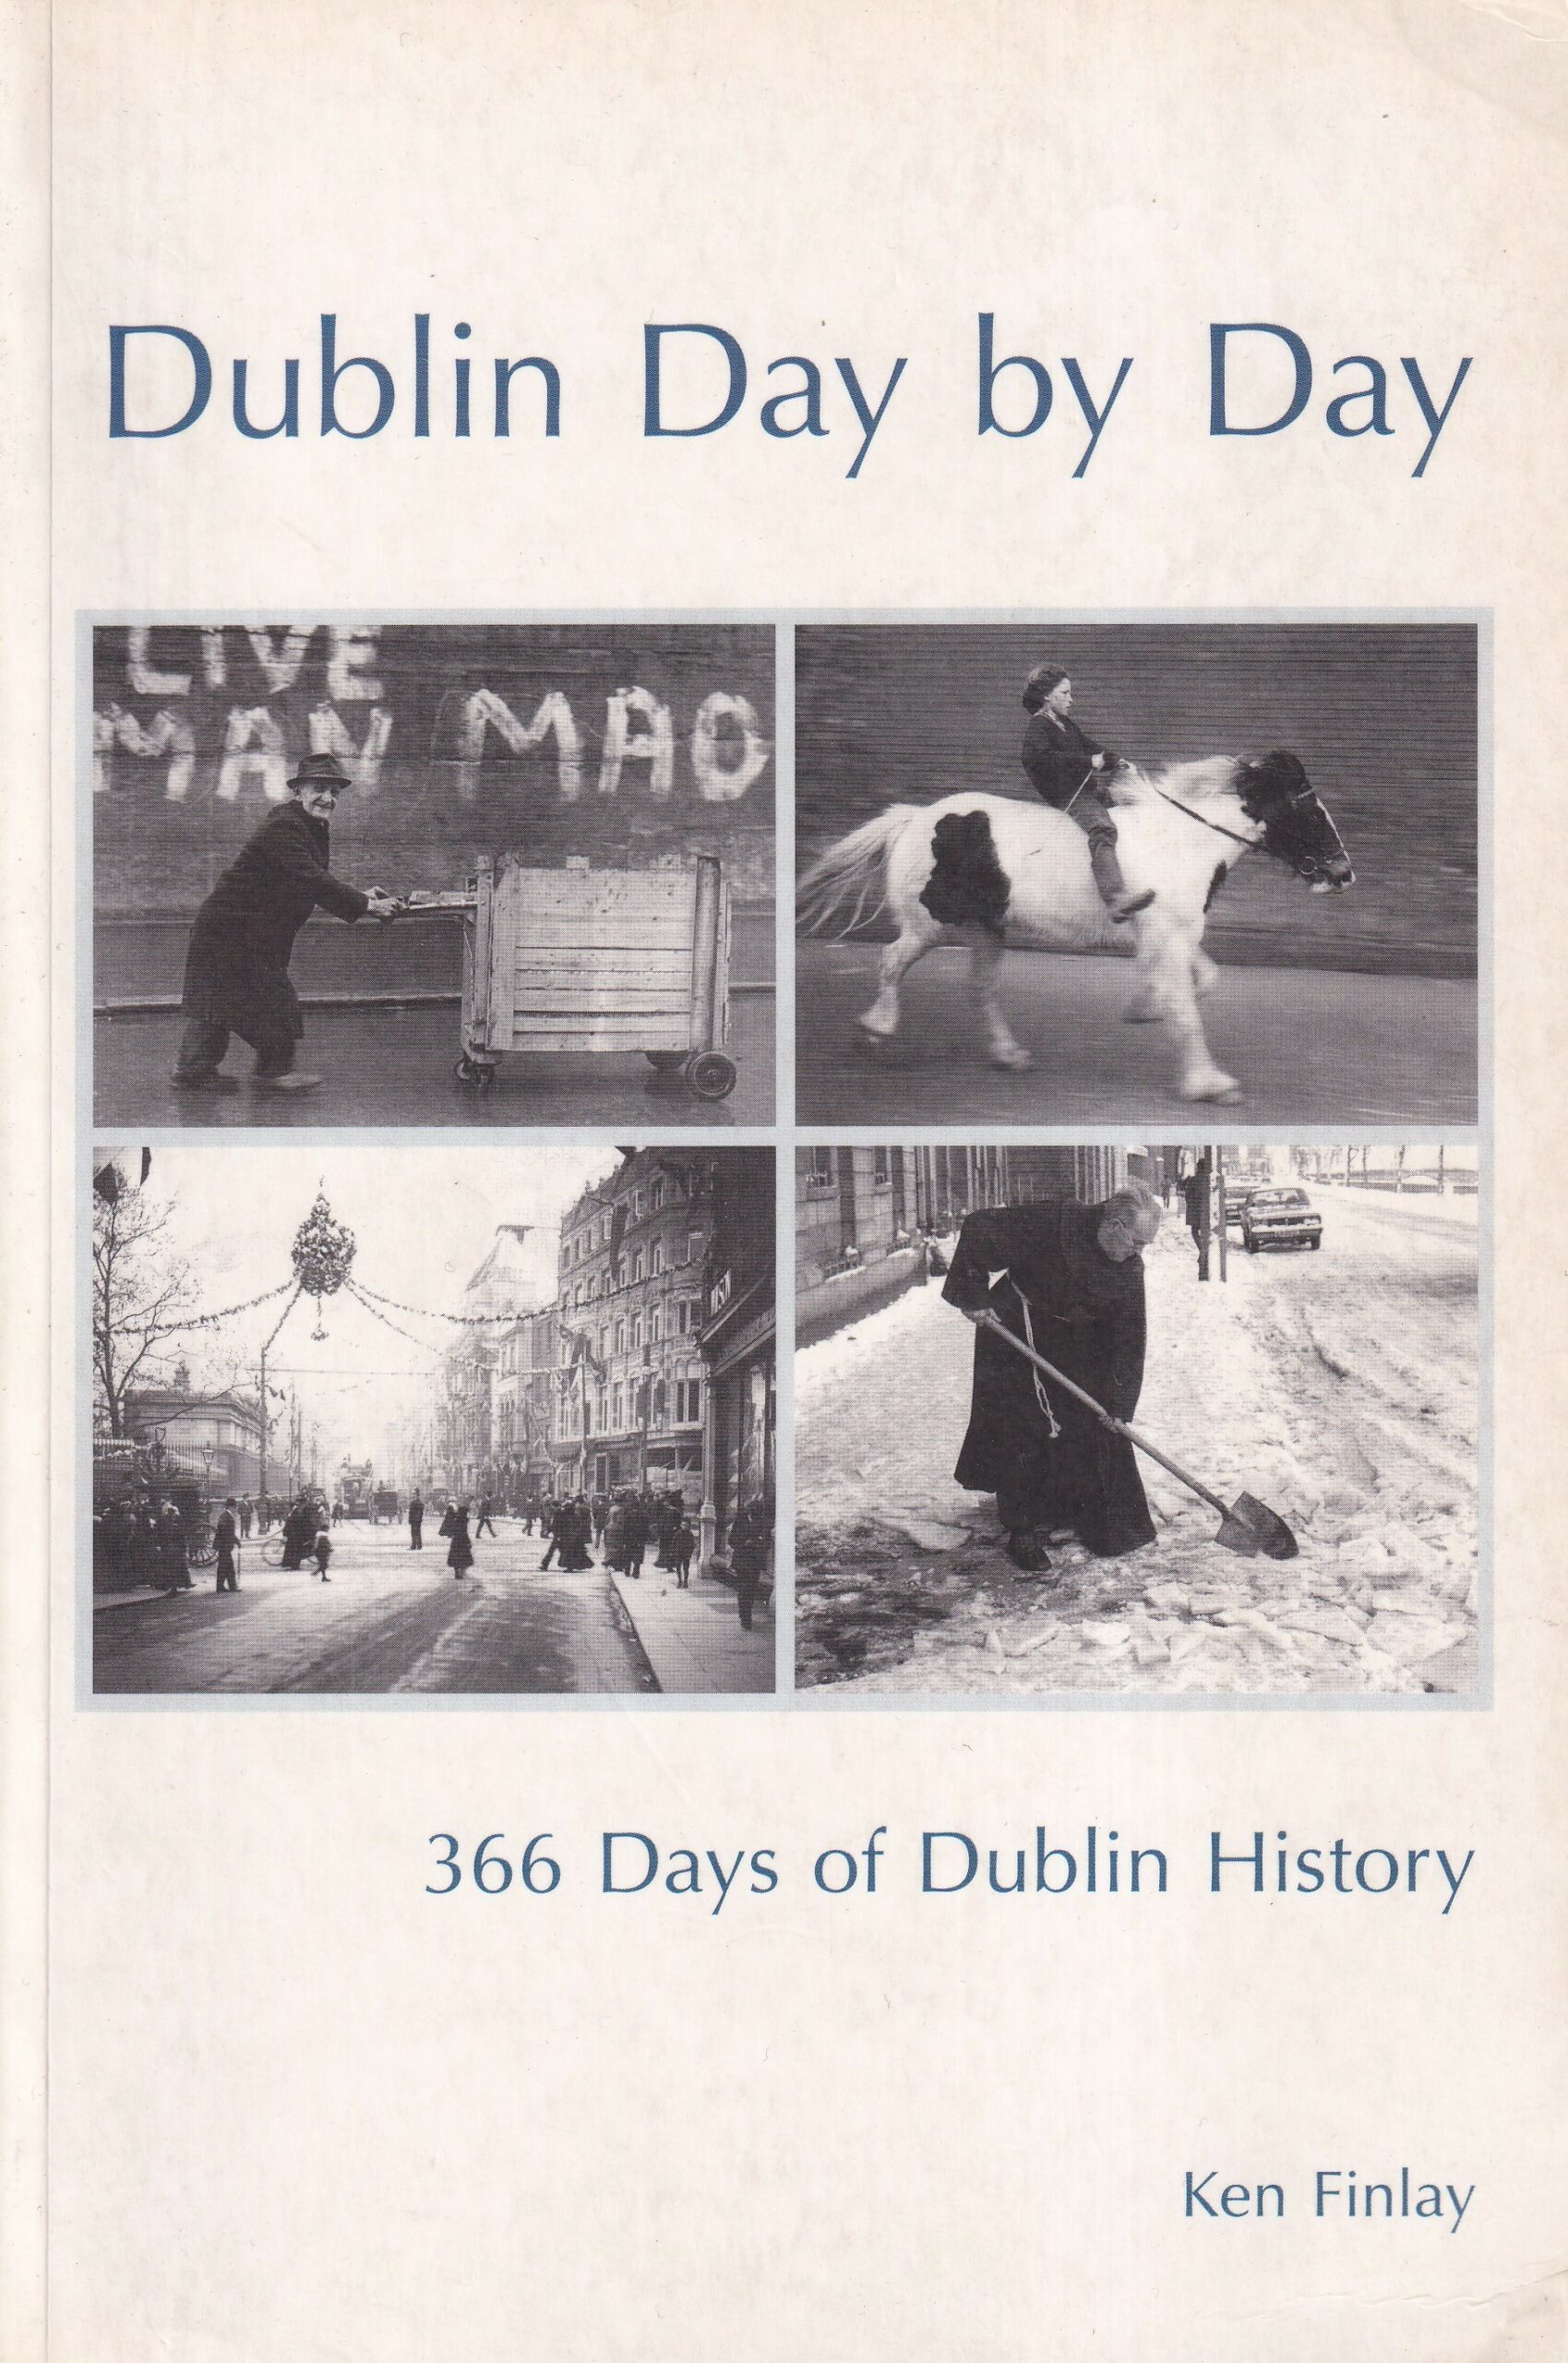 Dublin Day by Day: 366 Days of Dublin History | Ken Finlay | Charlie Byrne's